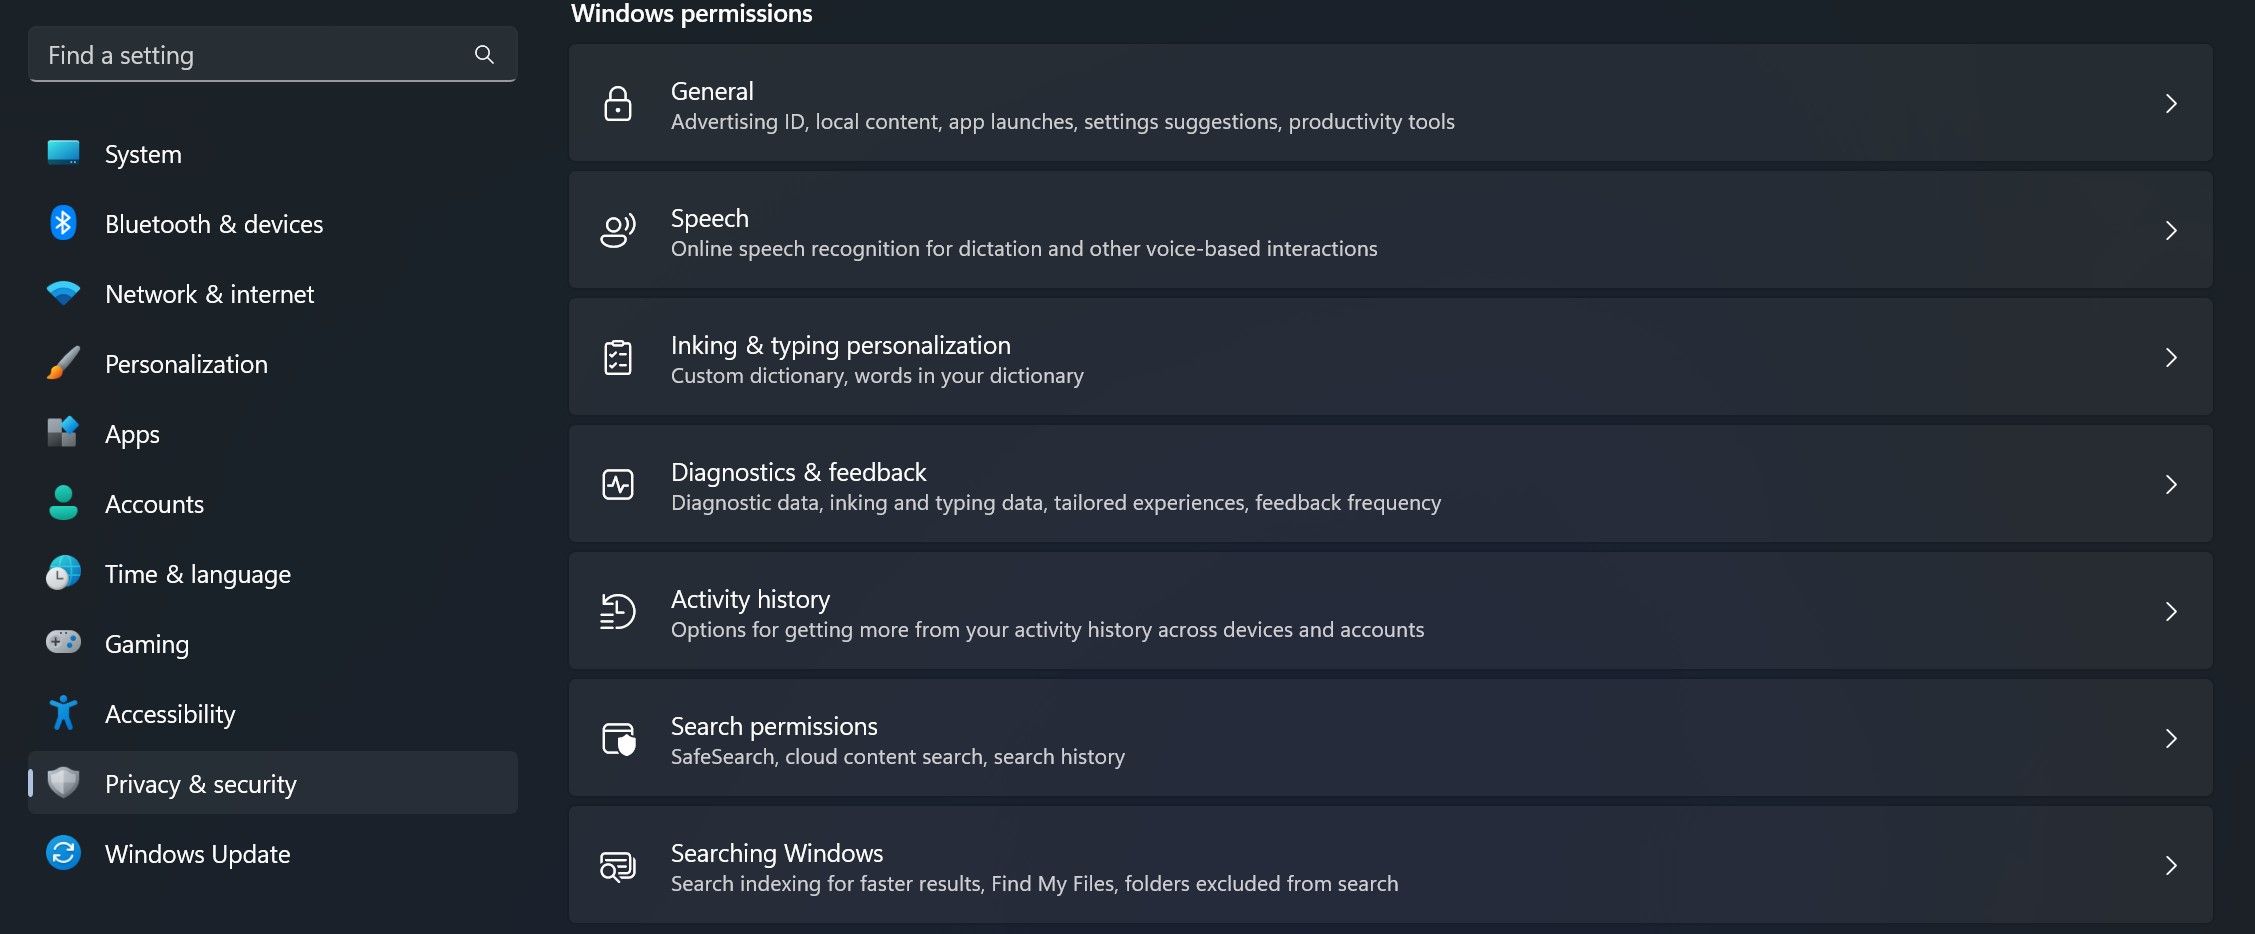 Windows Permissions Settings in the Privacy and Security Tab of the Windows Settings App